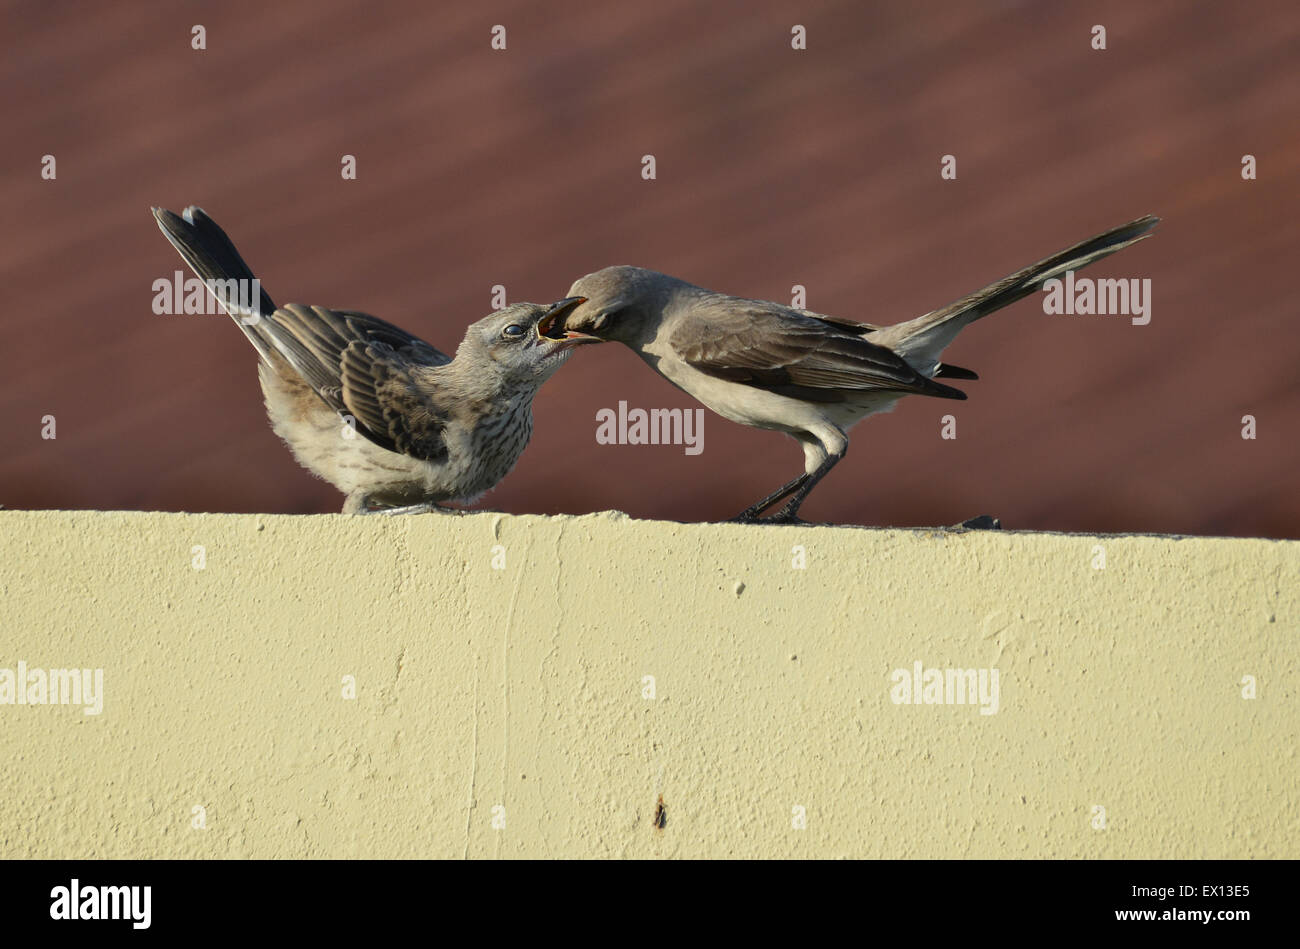 Mother mockingbird feeding a young one Stock Photo